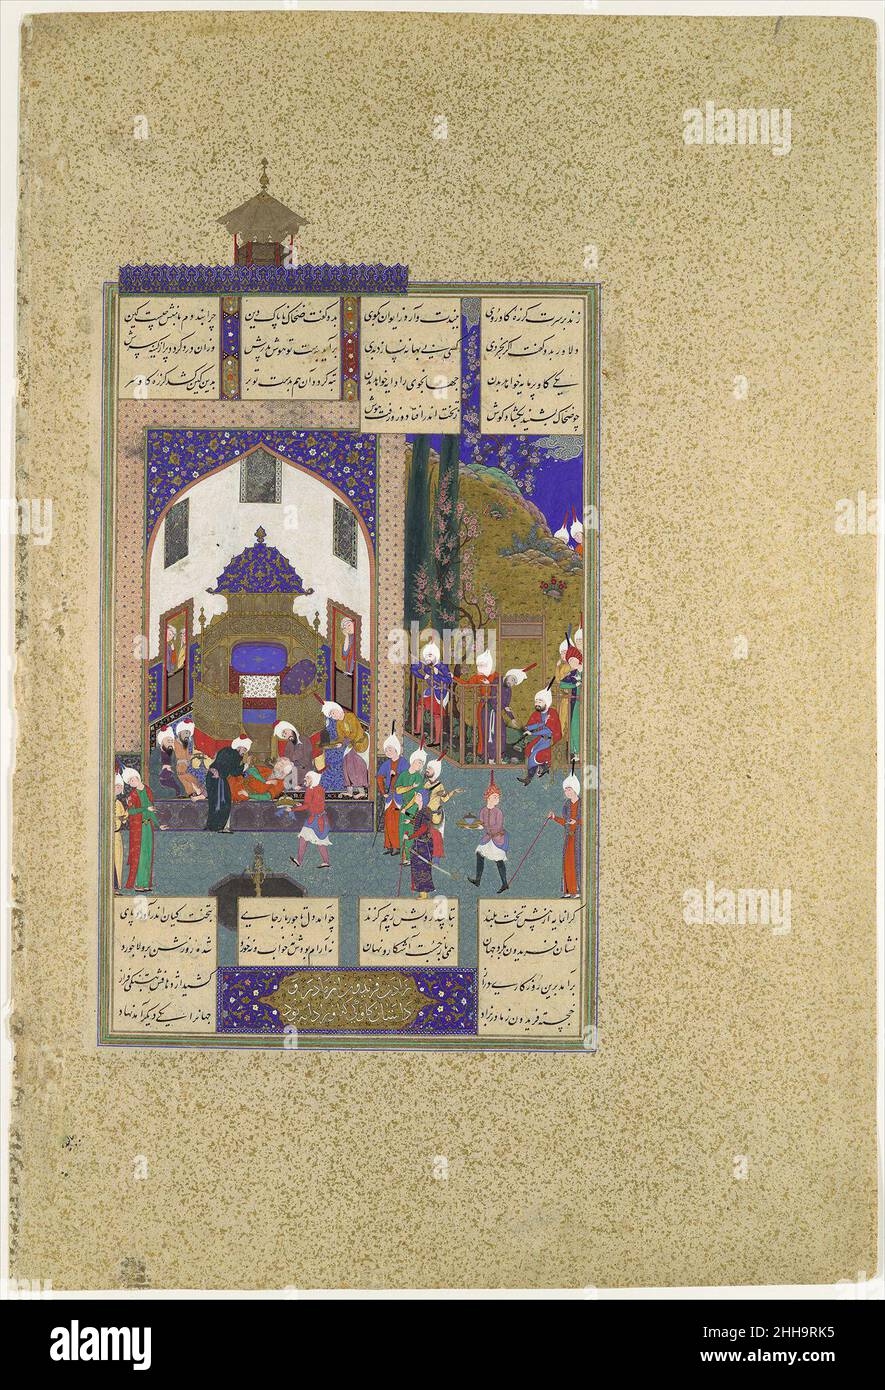 'Zahhak is Told His Fate', Folio 29v from the Shahnama (Book of Kings) of Shah Tahmasp ca. 1524 Abu'l Qasim Firdausi The evil king Zahhak faints when his wise men reveal the meaning of his nightmare: that one Faridun, as yet unborn, will justly bring about his downfall and death. The logical disposition of figures in space reflects the influence of the late Timurid Herat School of painting, whereas the bending rosebush and snail-like clouds at the right derive from Turkmen painting as practiced at Tabriz. The animated characterizations, however, are typical of the work of Sultan Muhammad, head Stock Photo